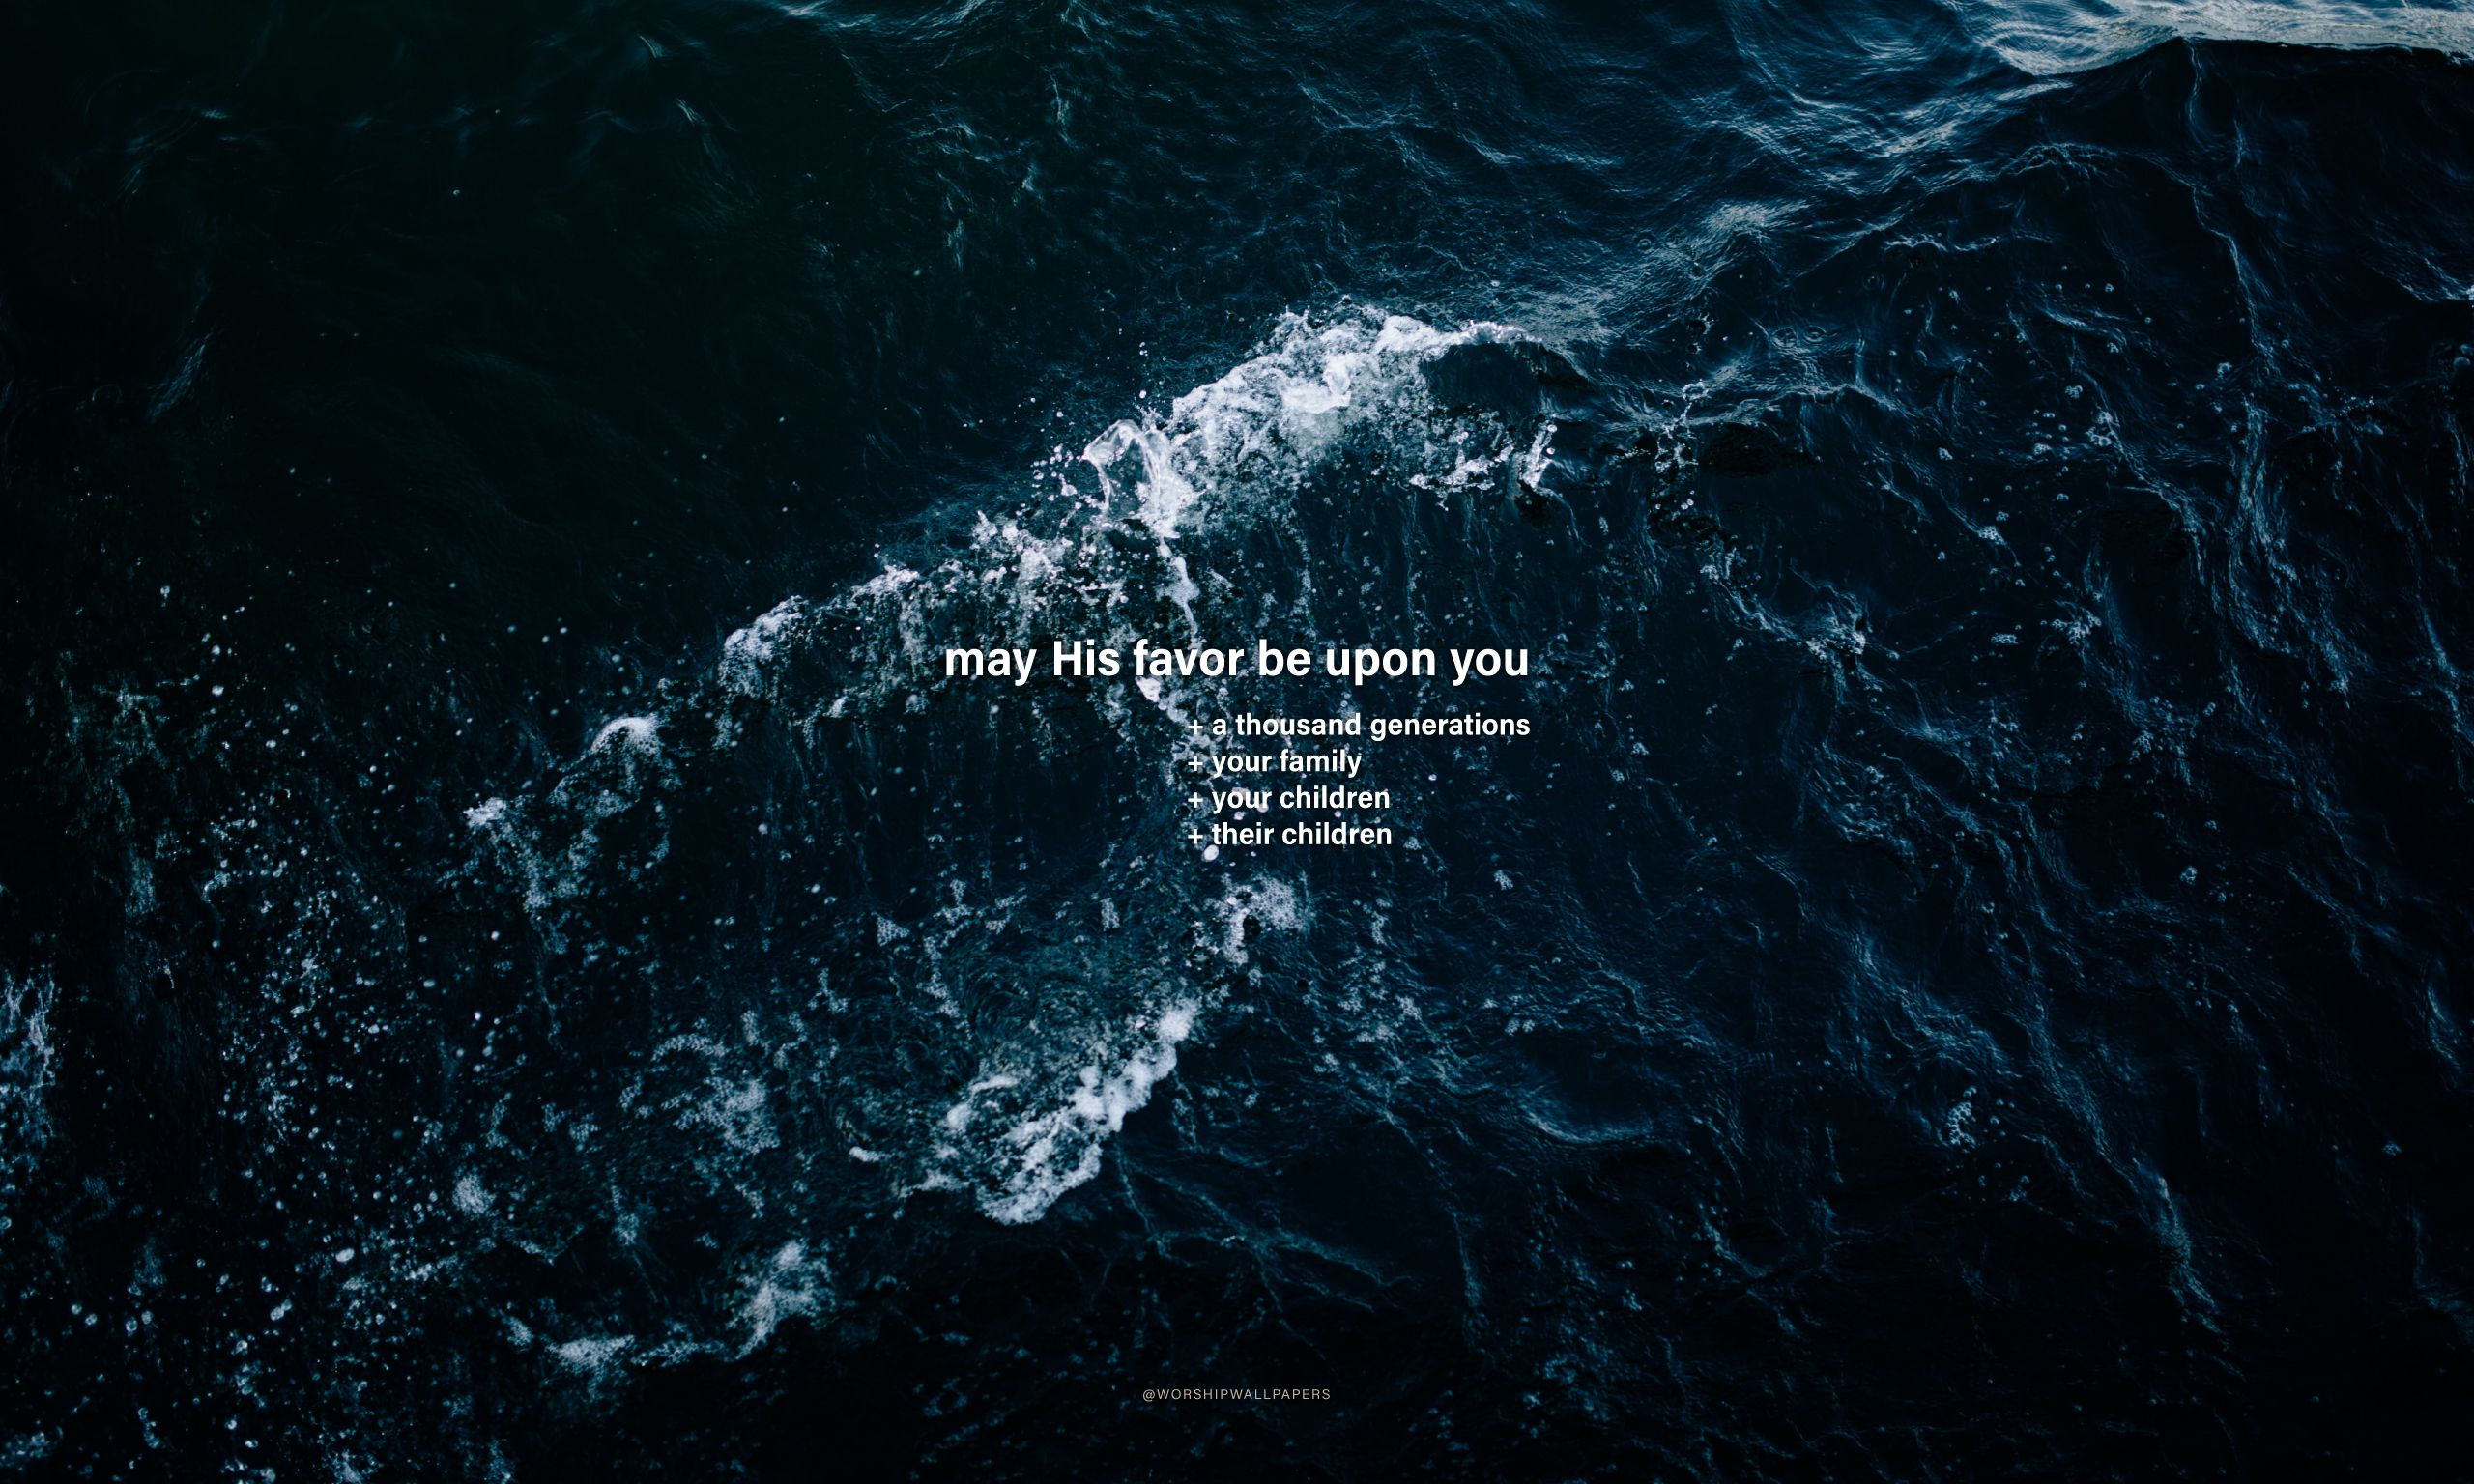 WORSHIP WALLPAPERS. Free HD worship lyric wallpaper for your phone and laptop